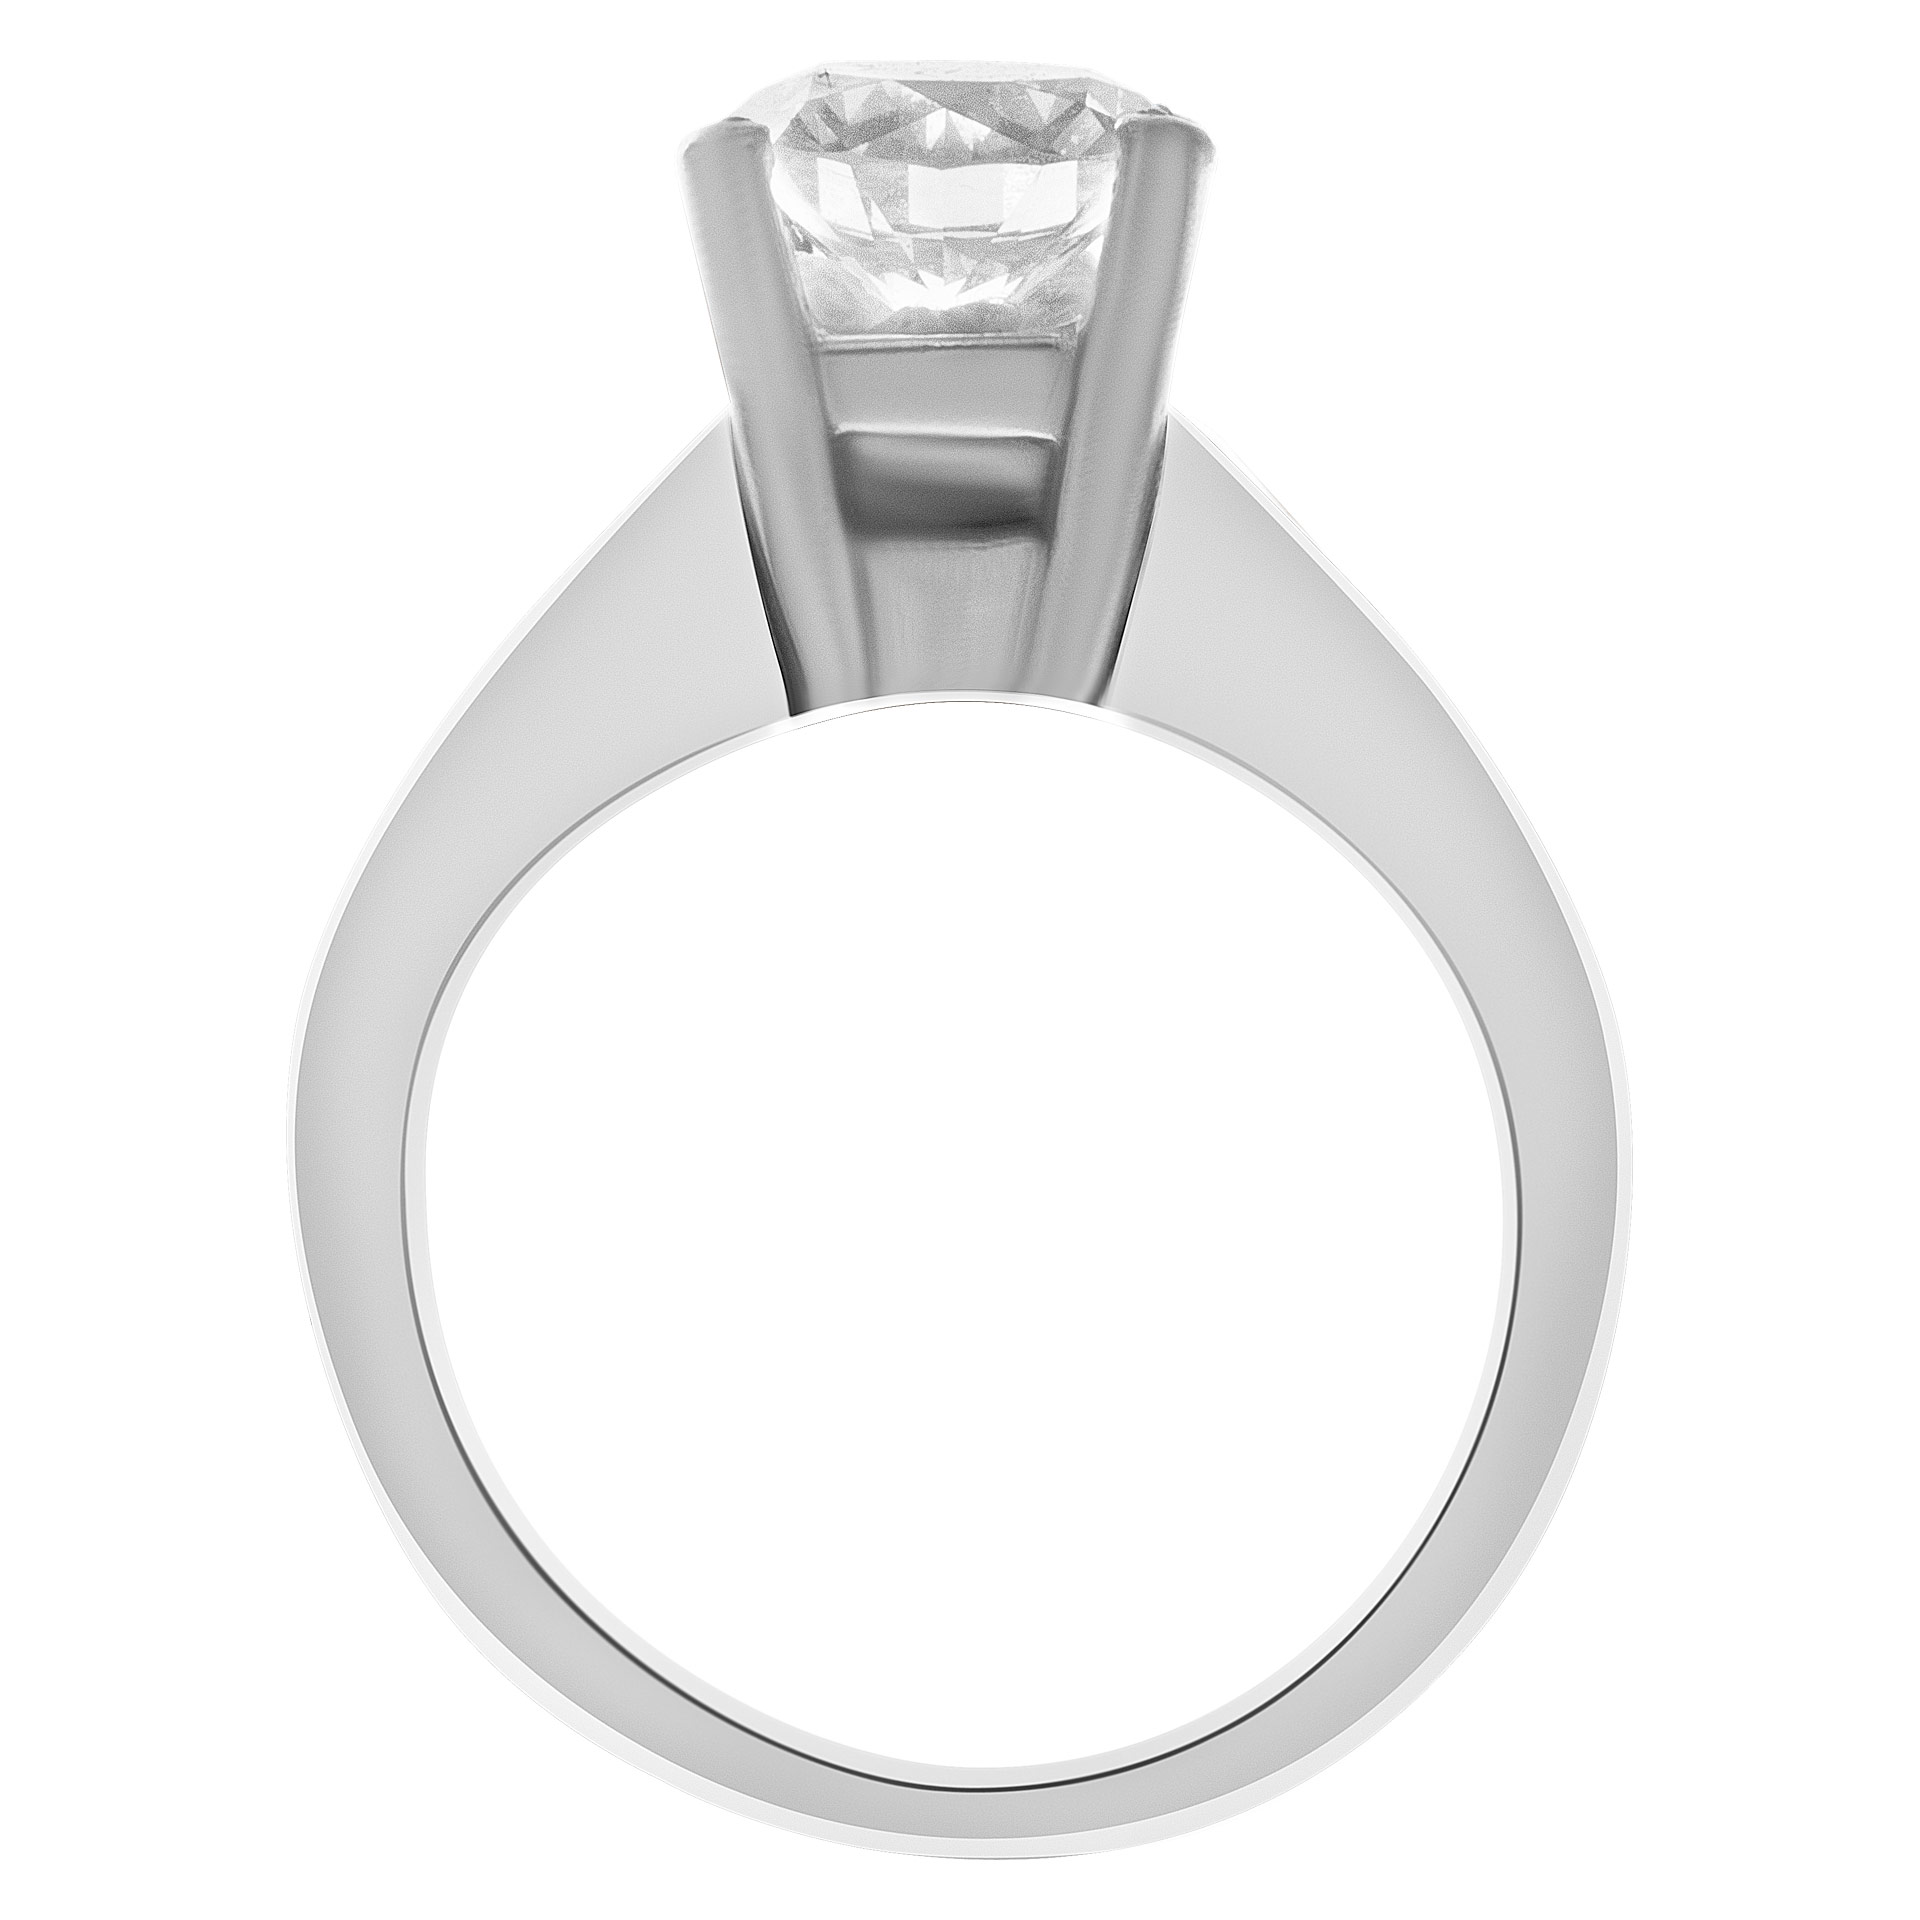 GIA certified round brilliant cut 1.14 carat D color, VS2 clarity diamond ring image 3